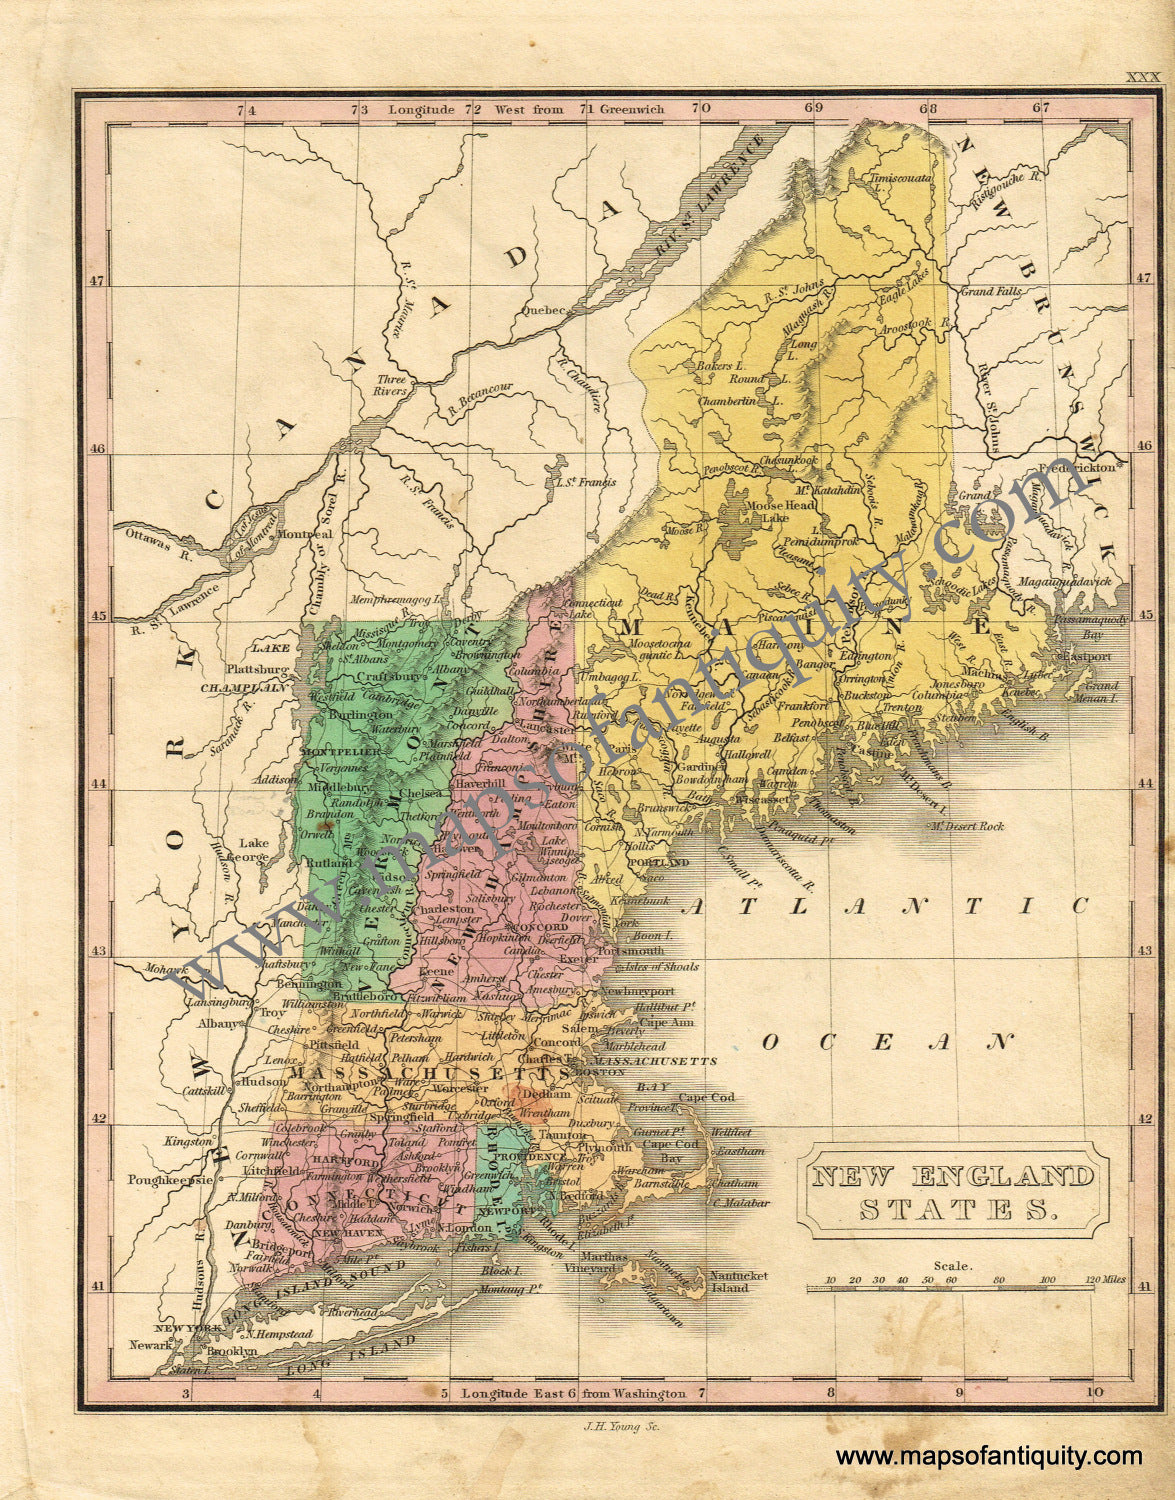 Antique-Hand-Colored-Map-New-England-States-******-New-England--1828-M.-Malte-Brun-Maps-Of-Antiquity